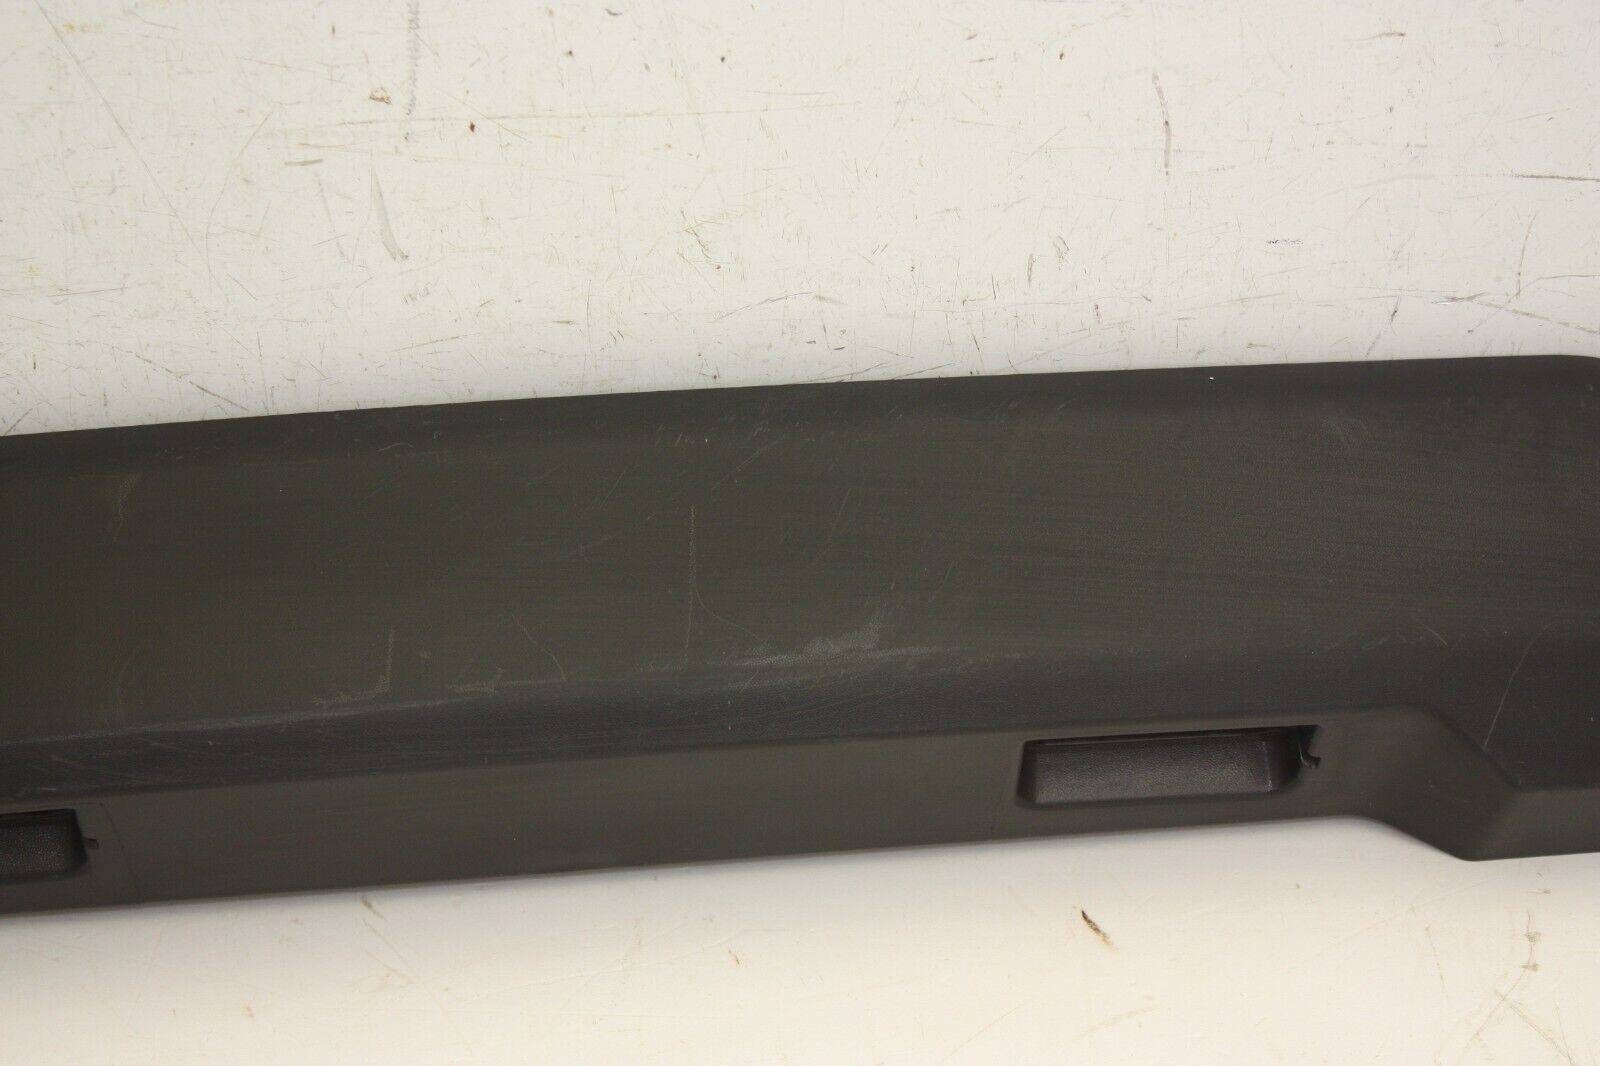 Ford-Transit-Custom-Tailgate-Lid-Cover-Recording-Bar-2018-ON-BK21-13555-AFW-176302846649-3